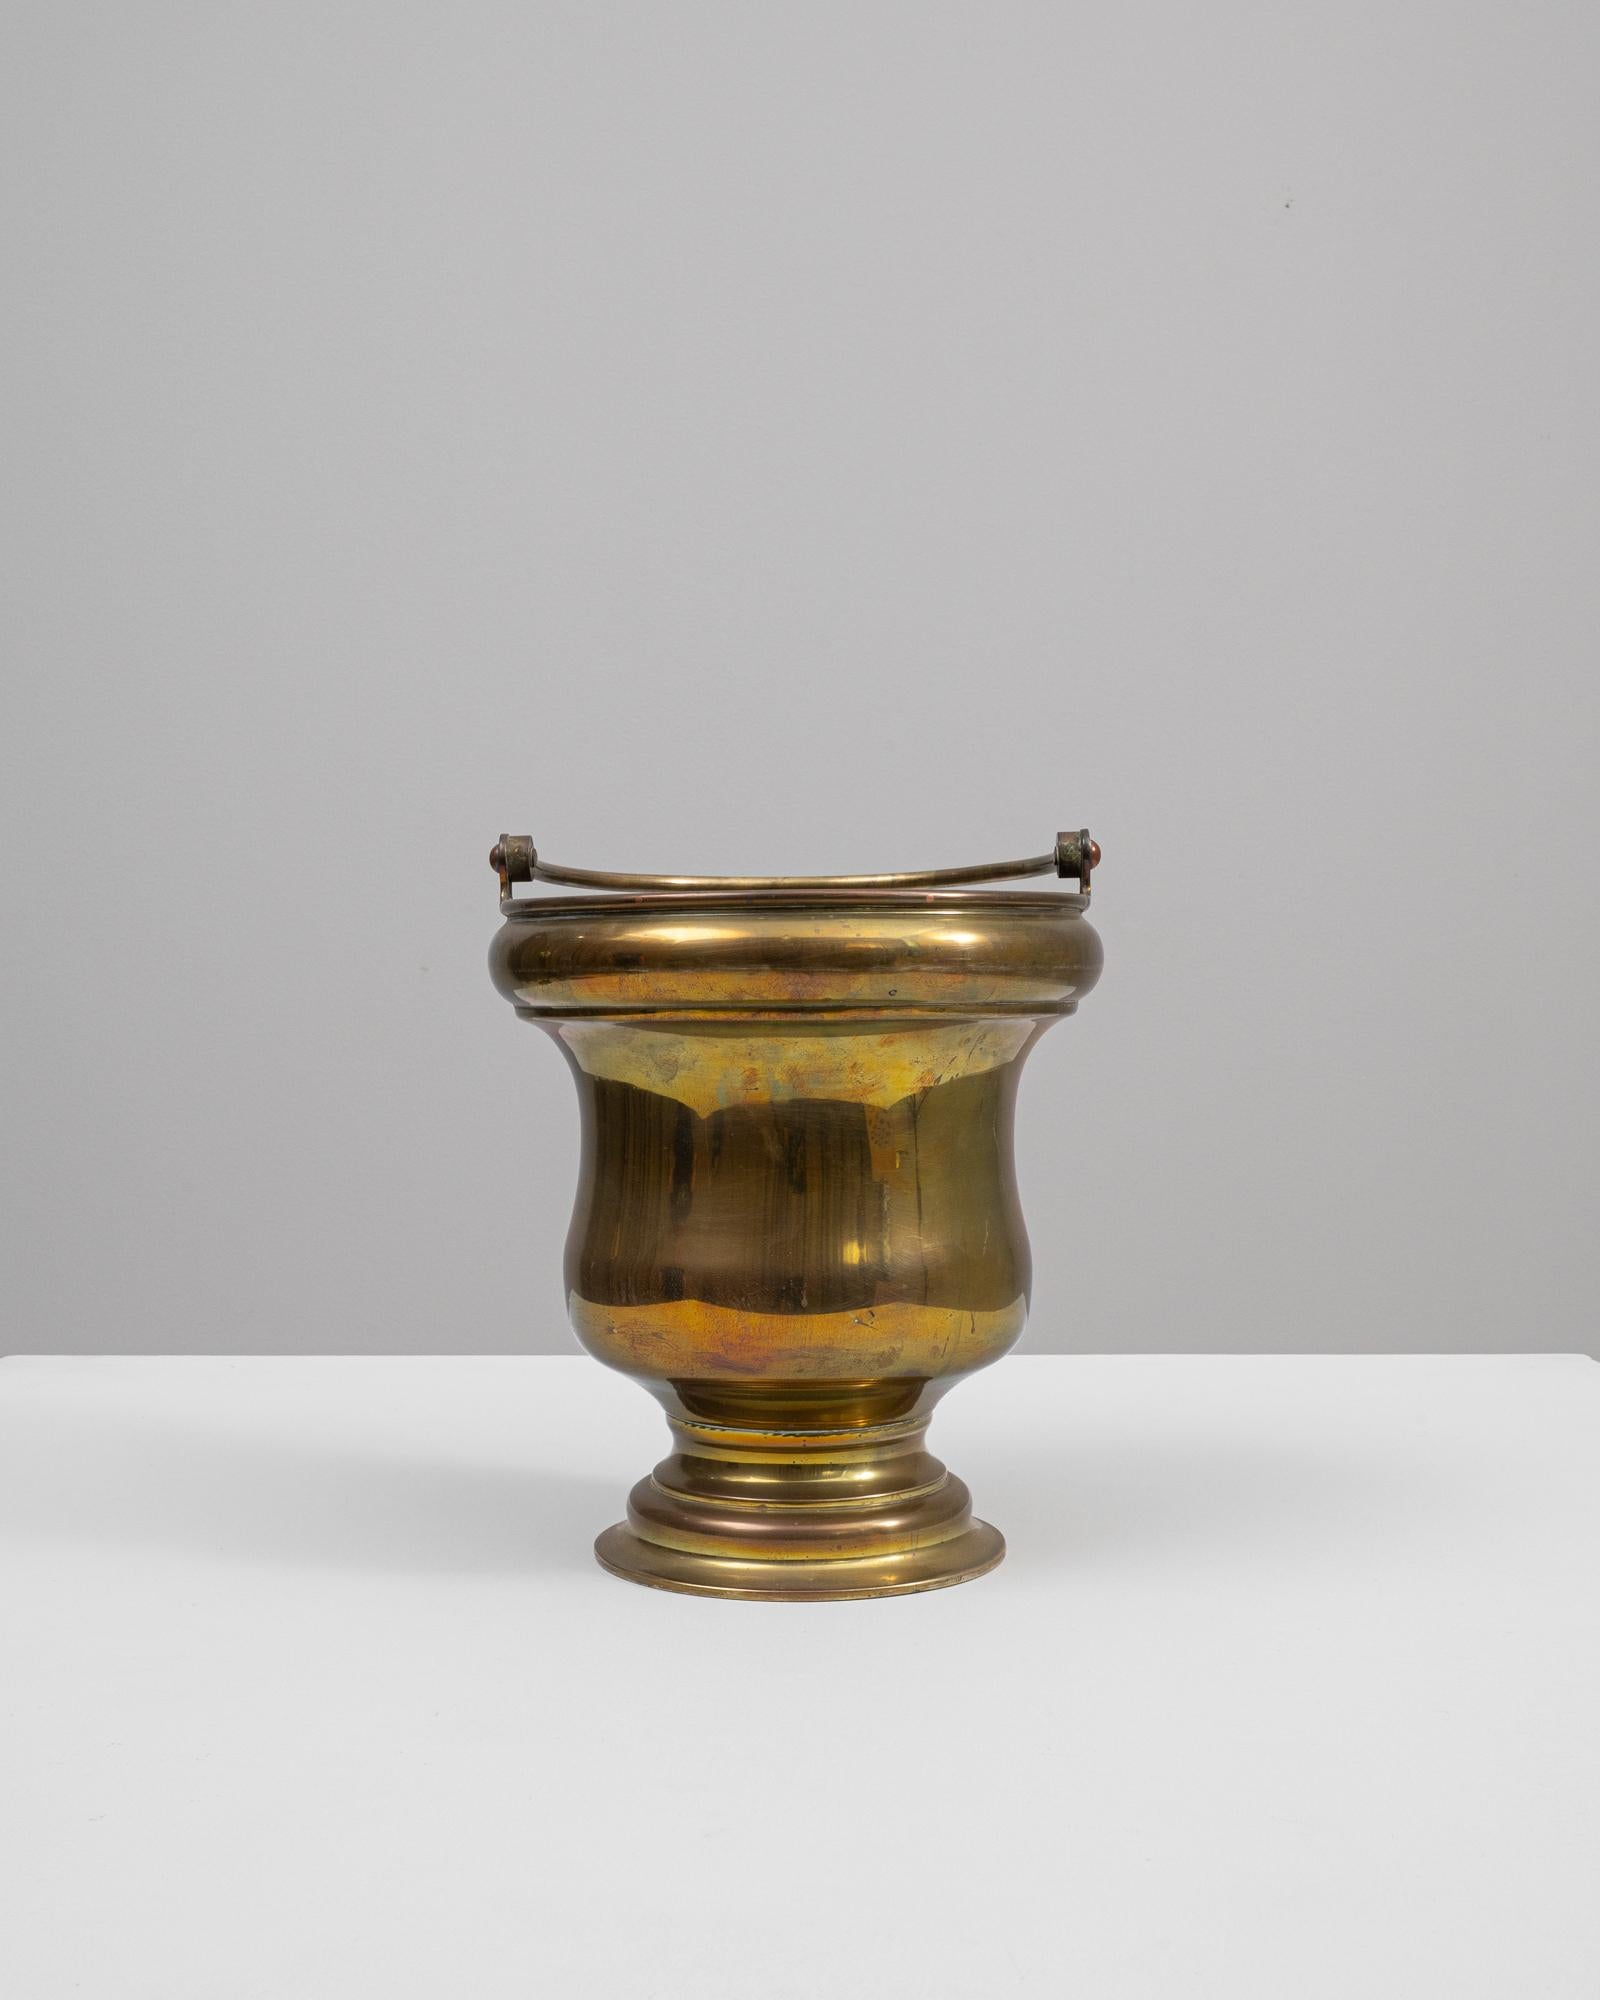 This 19th-century French brass ice bucket is a piece that exudes vintage charm and elegance. Its gleaming brass construction features a subtle patina that tells the tale of numerous festive gatherings and soirees. The bucket is shaped with a